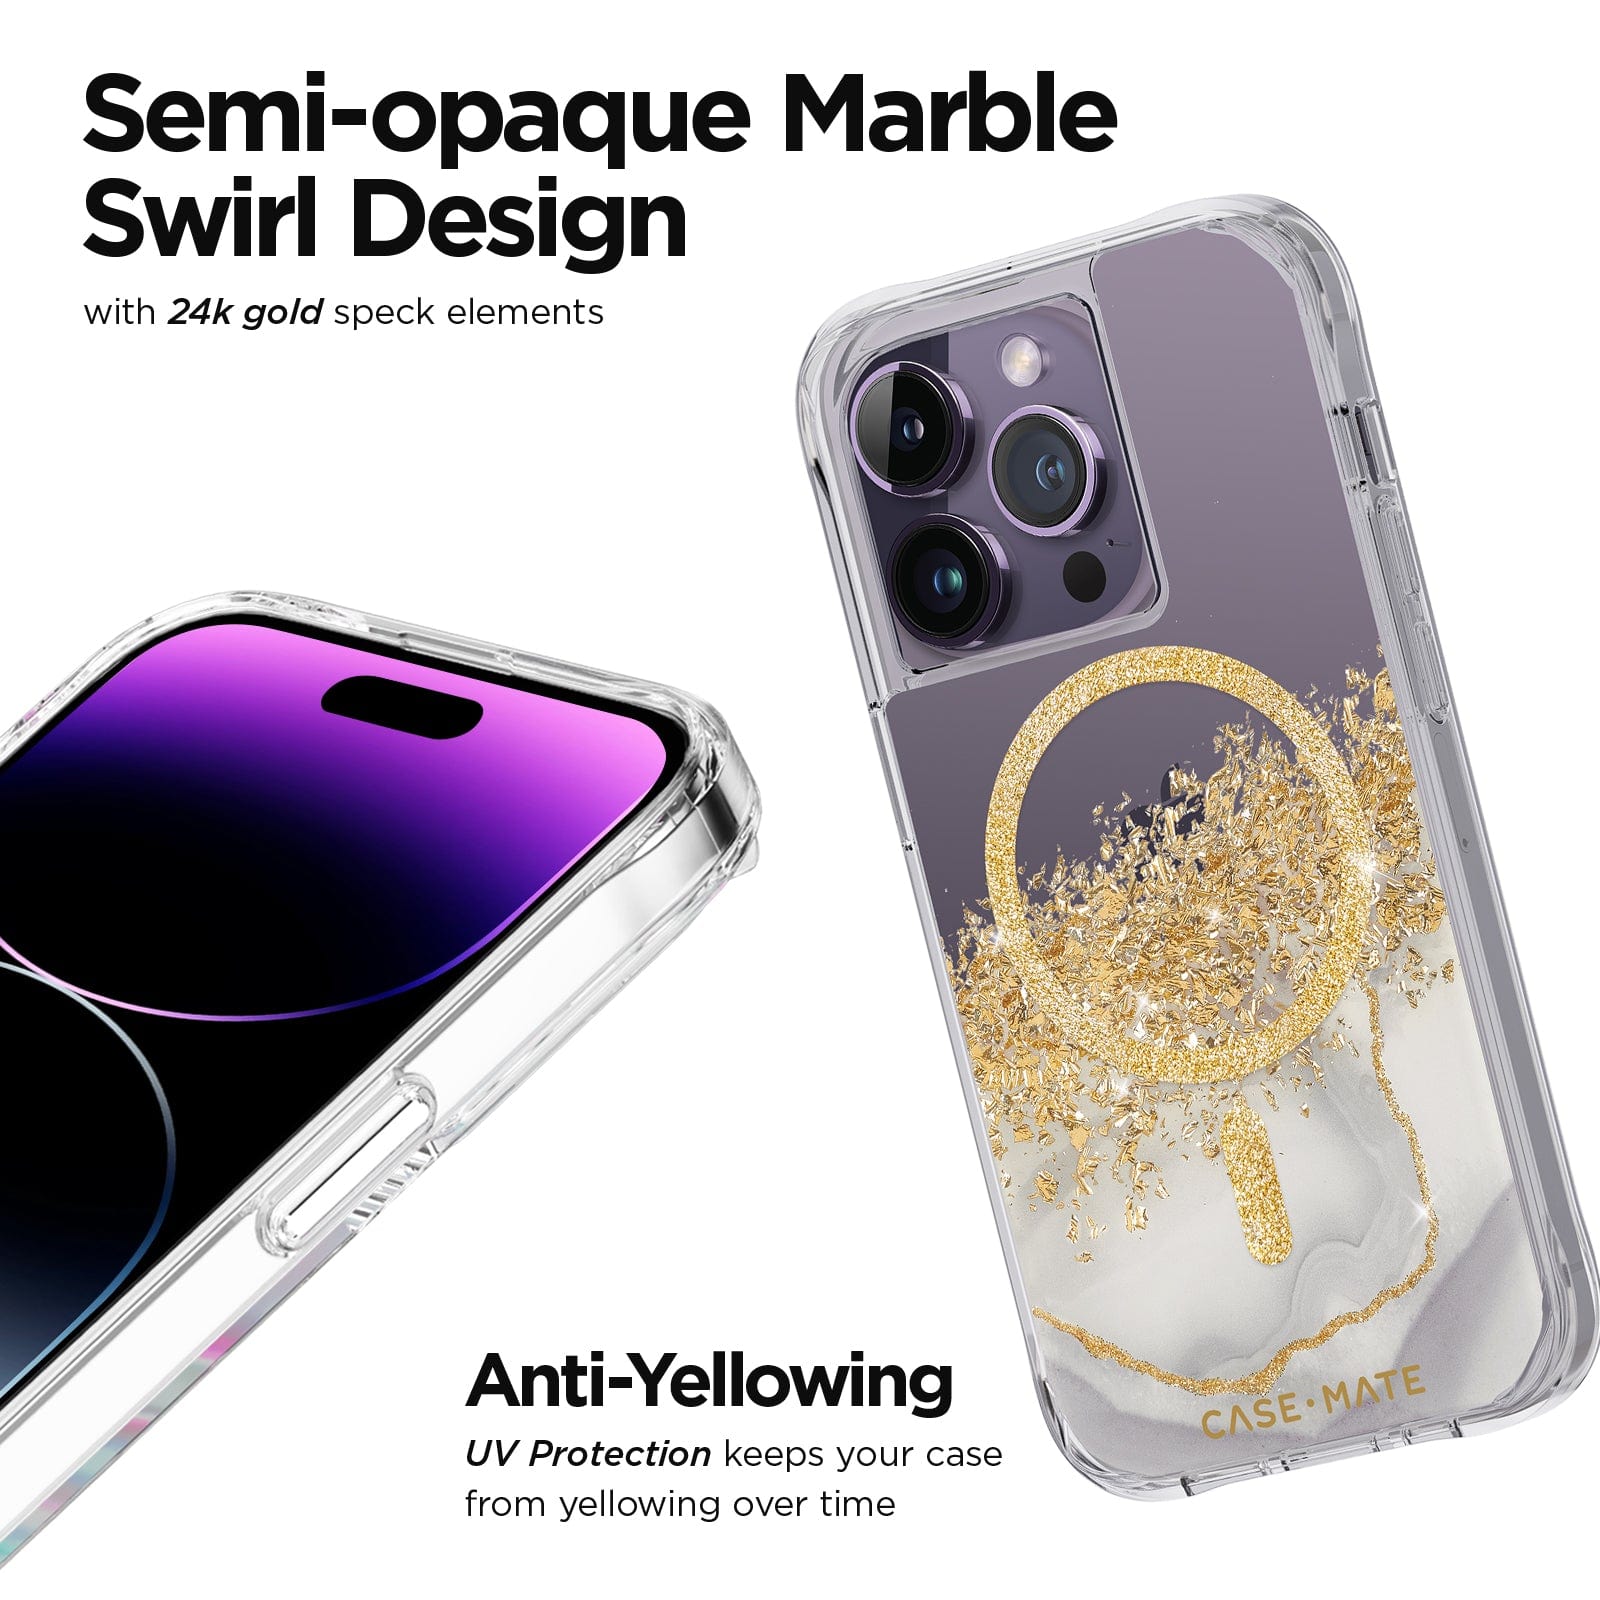 SEMI-OPAQUE MARBLE SWIRL DESIGN. WITH 24K GOLD SPECK ELEMENTS. ANTI-YELLOWING UV PROTECTION KEEPS YOUR CASE FORM YELLOWING OVER TIME. 